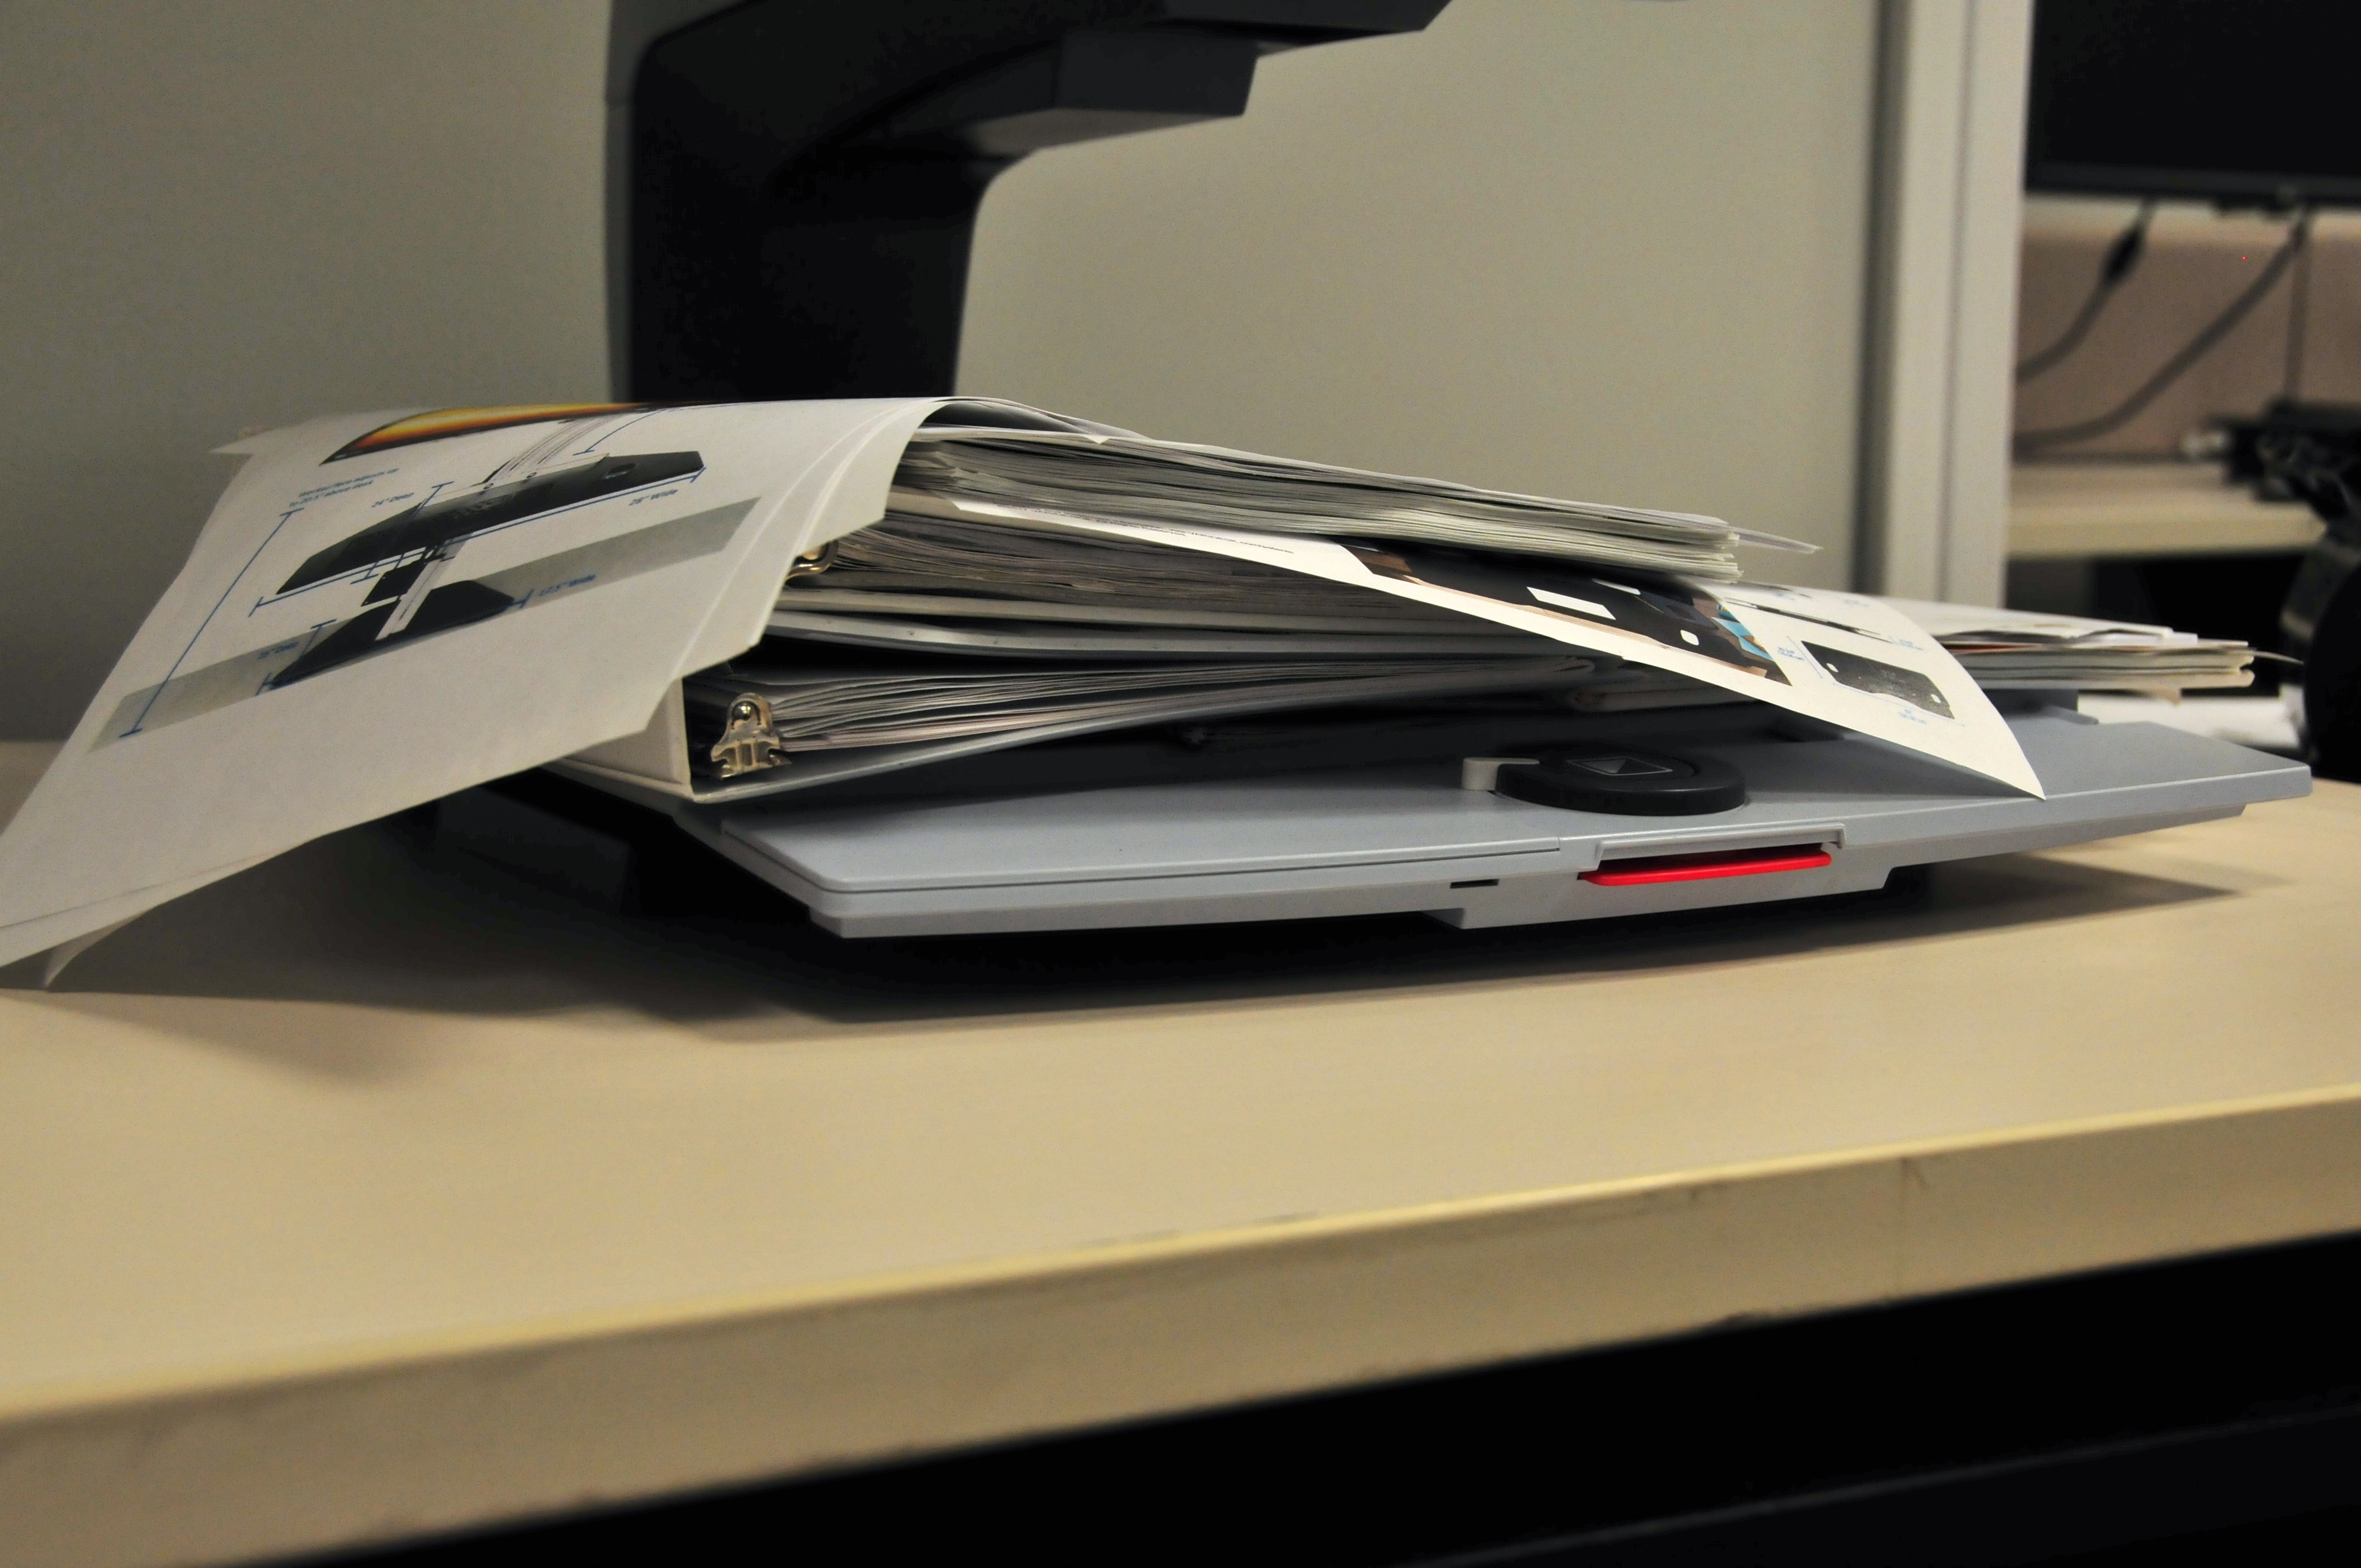 An untidy pile of files and documents